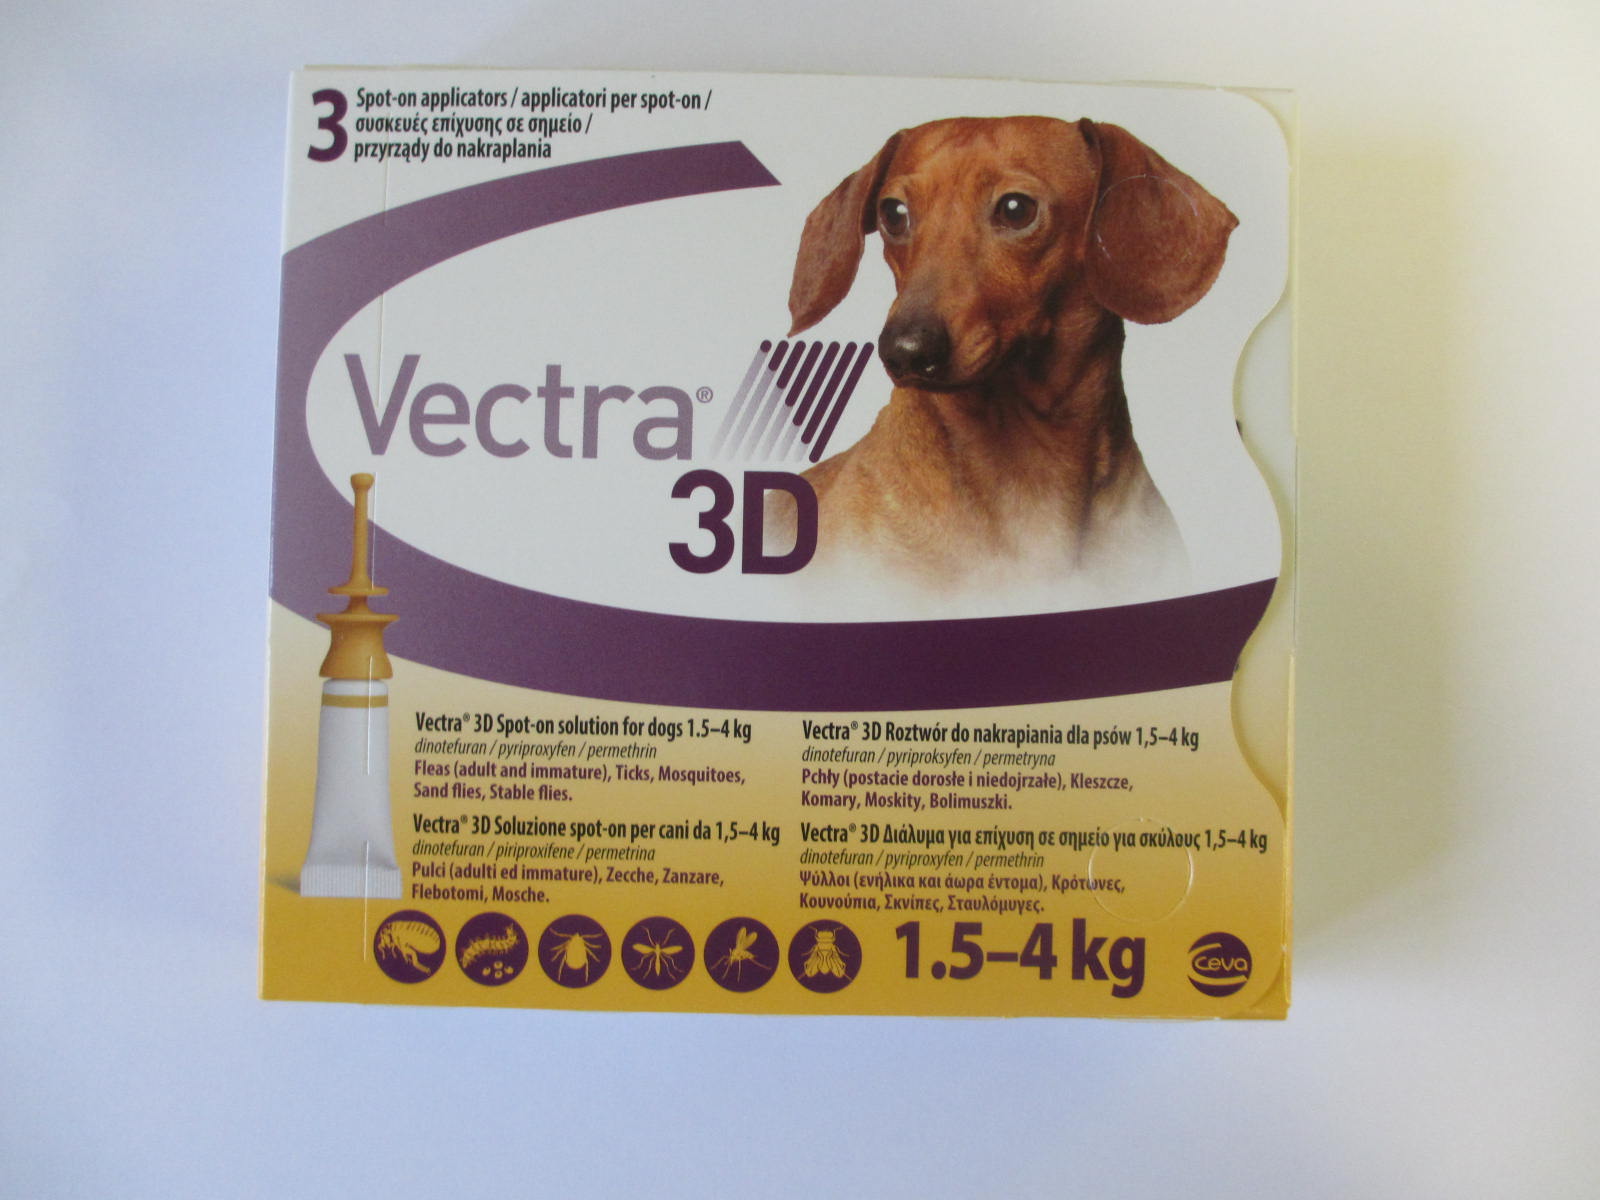 Vectra 3D for Dogs - 5 - 10 lbs - Orange - 6 pack - $70.90 | Flea